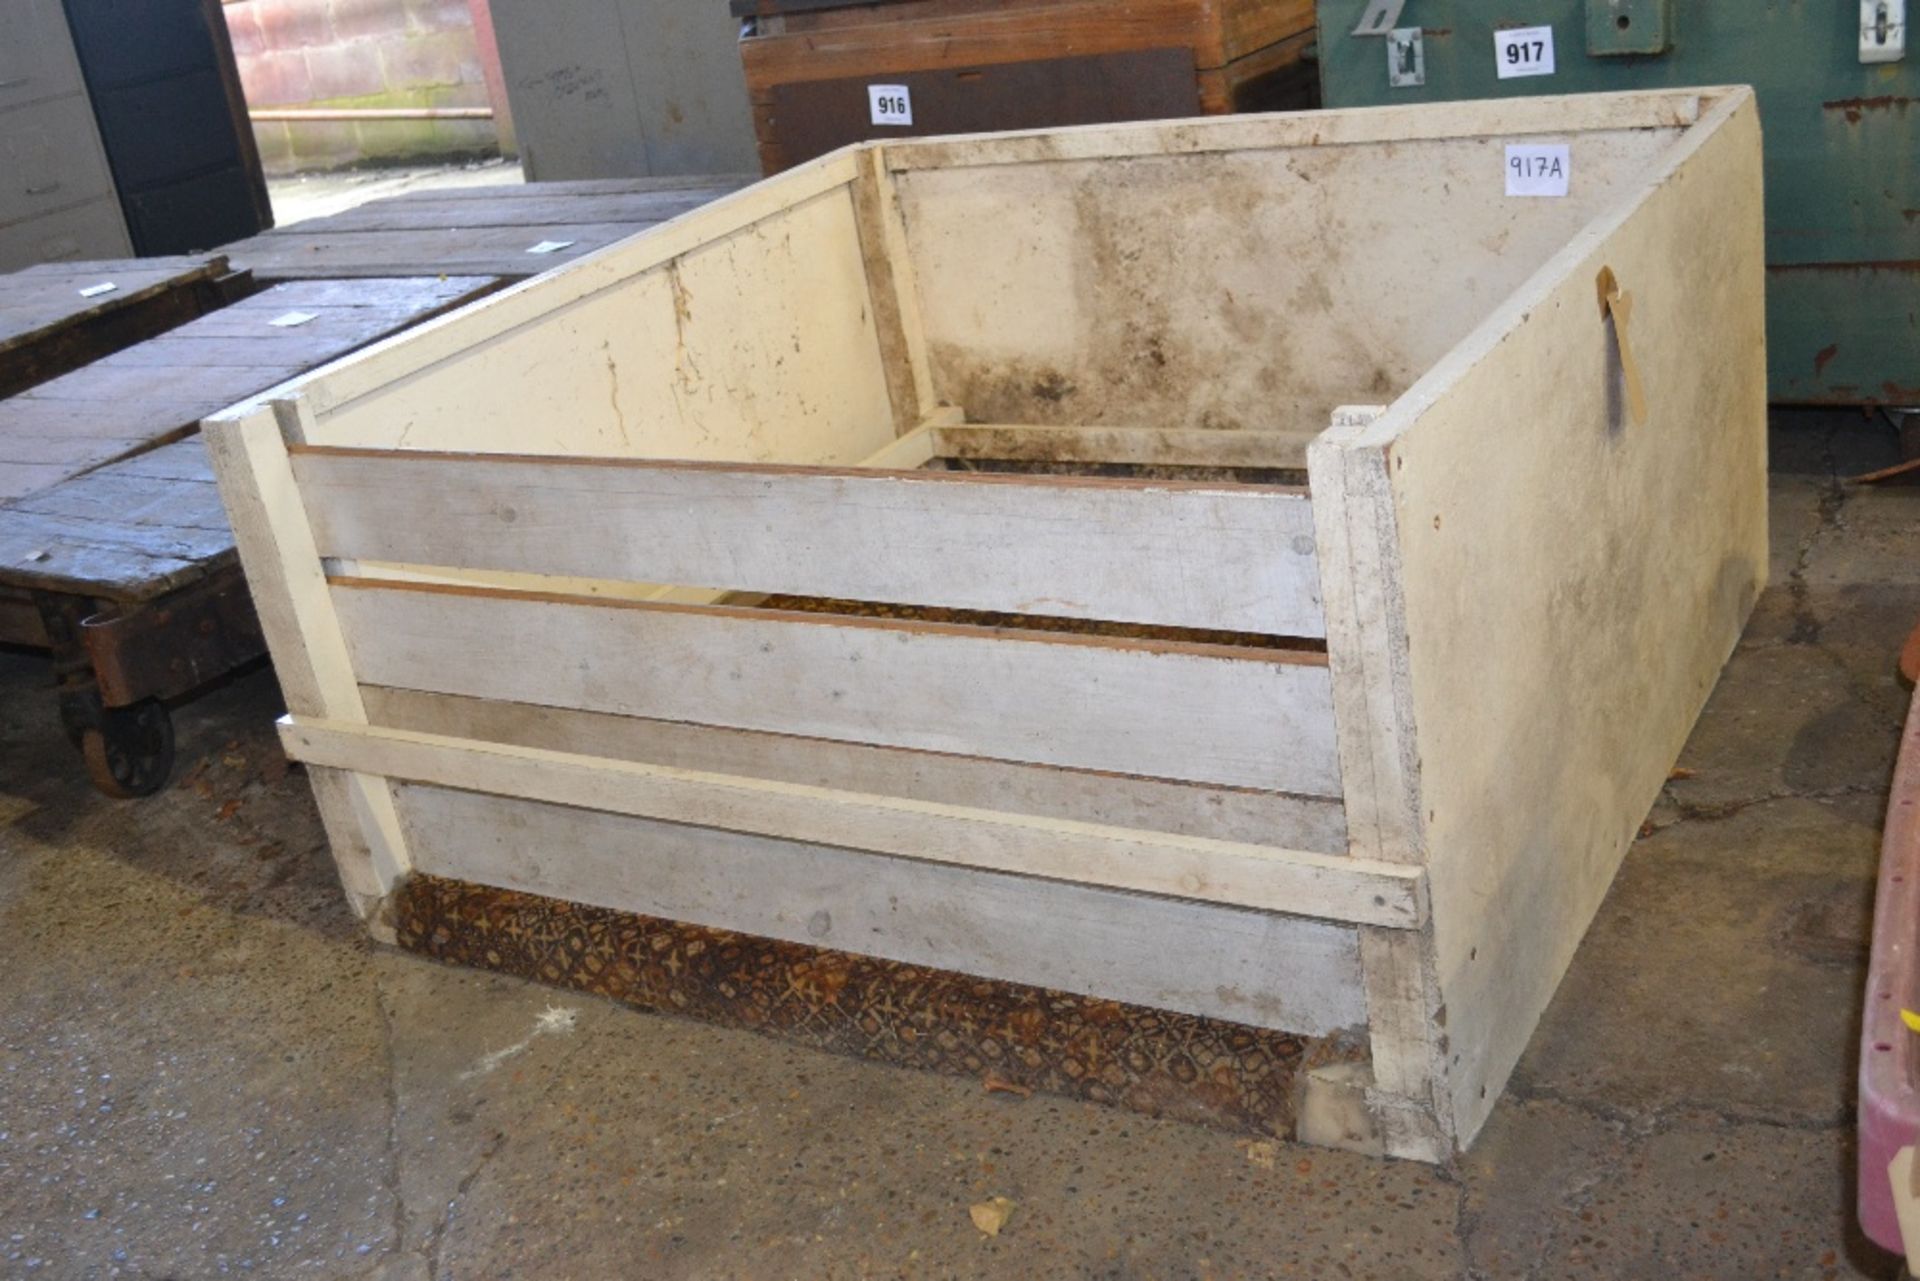 Large whelping box with safety side bars.